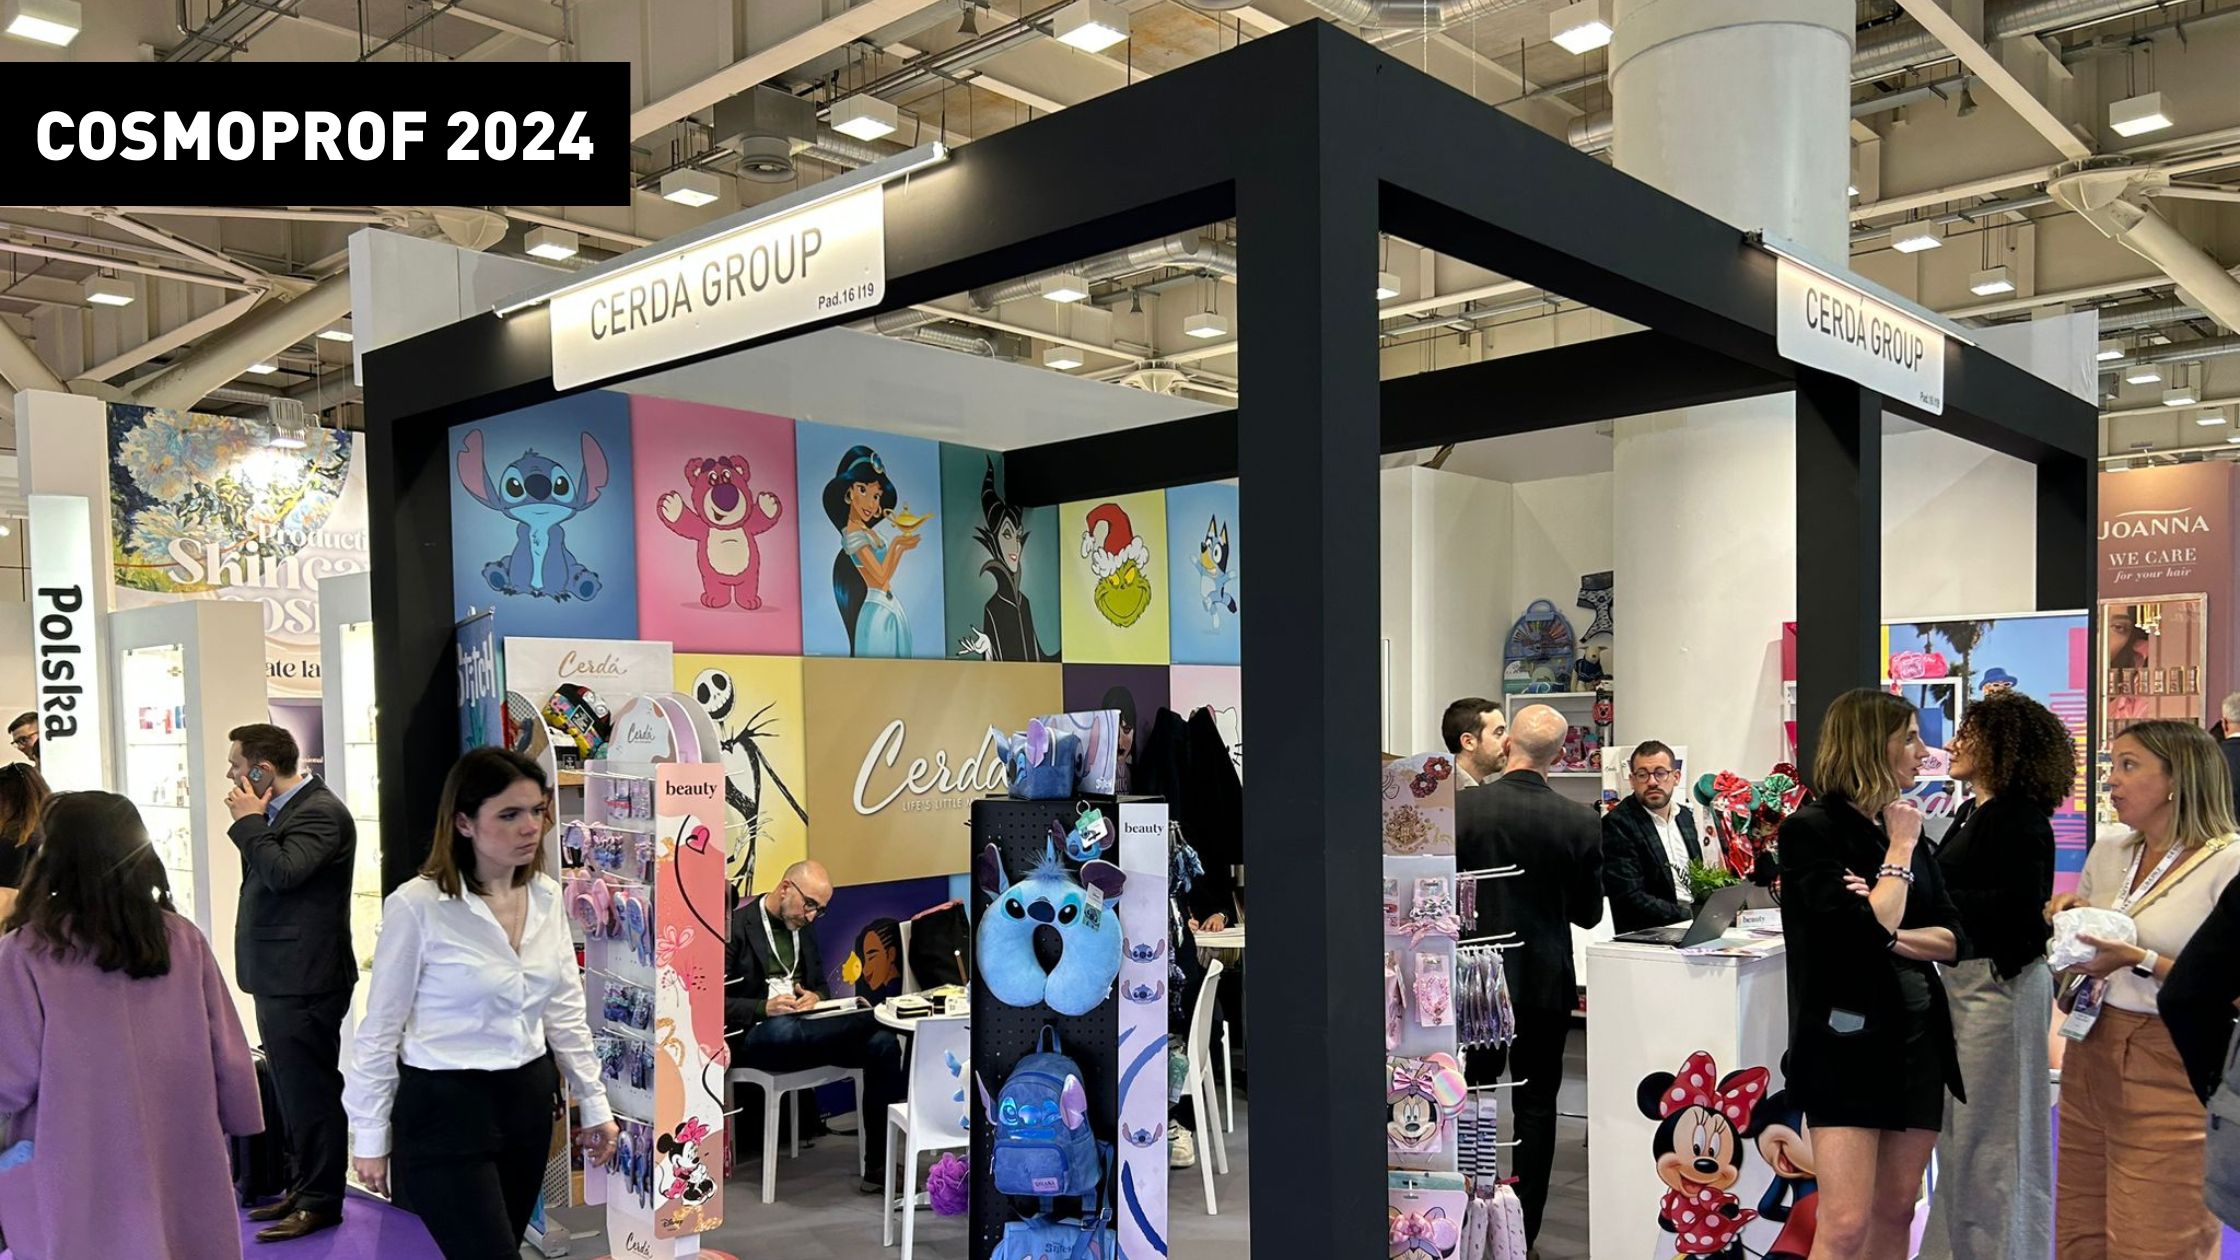 We are back at Cosmoprof 2024!